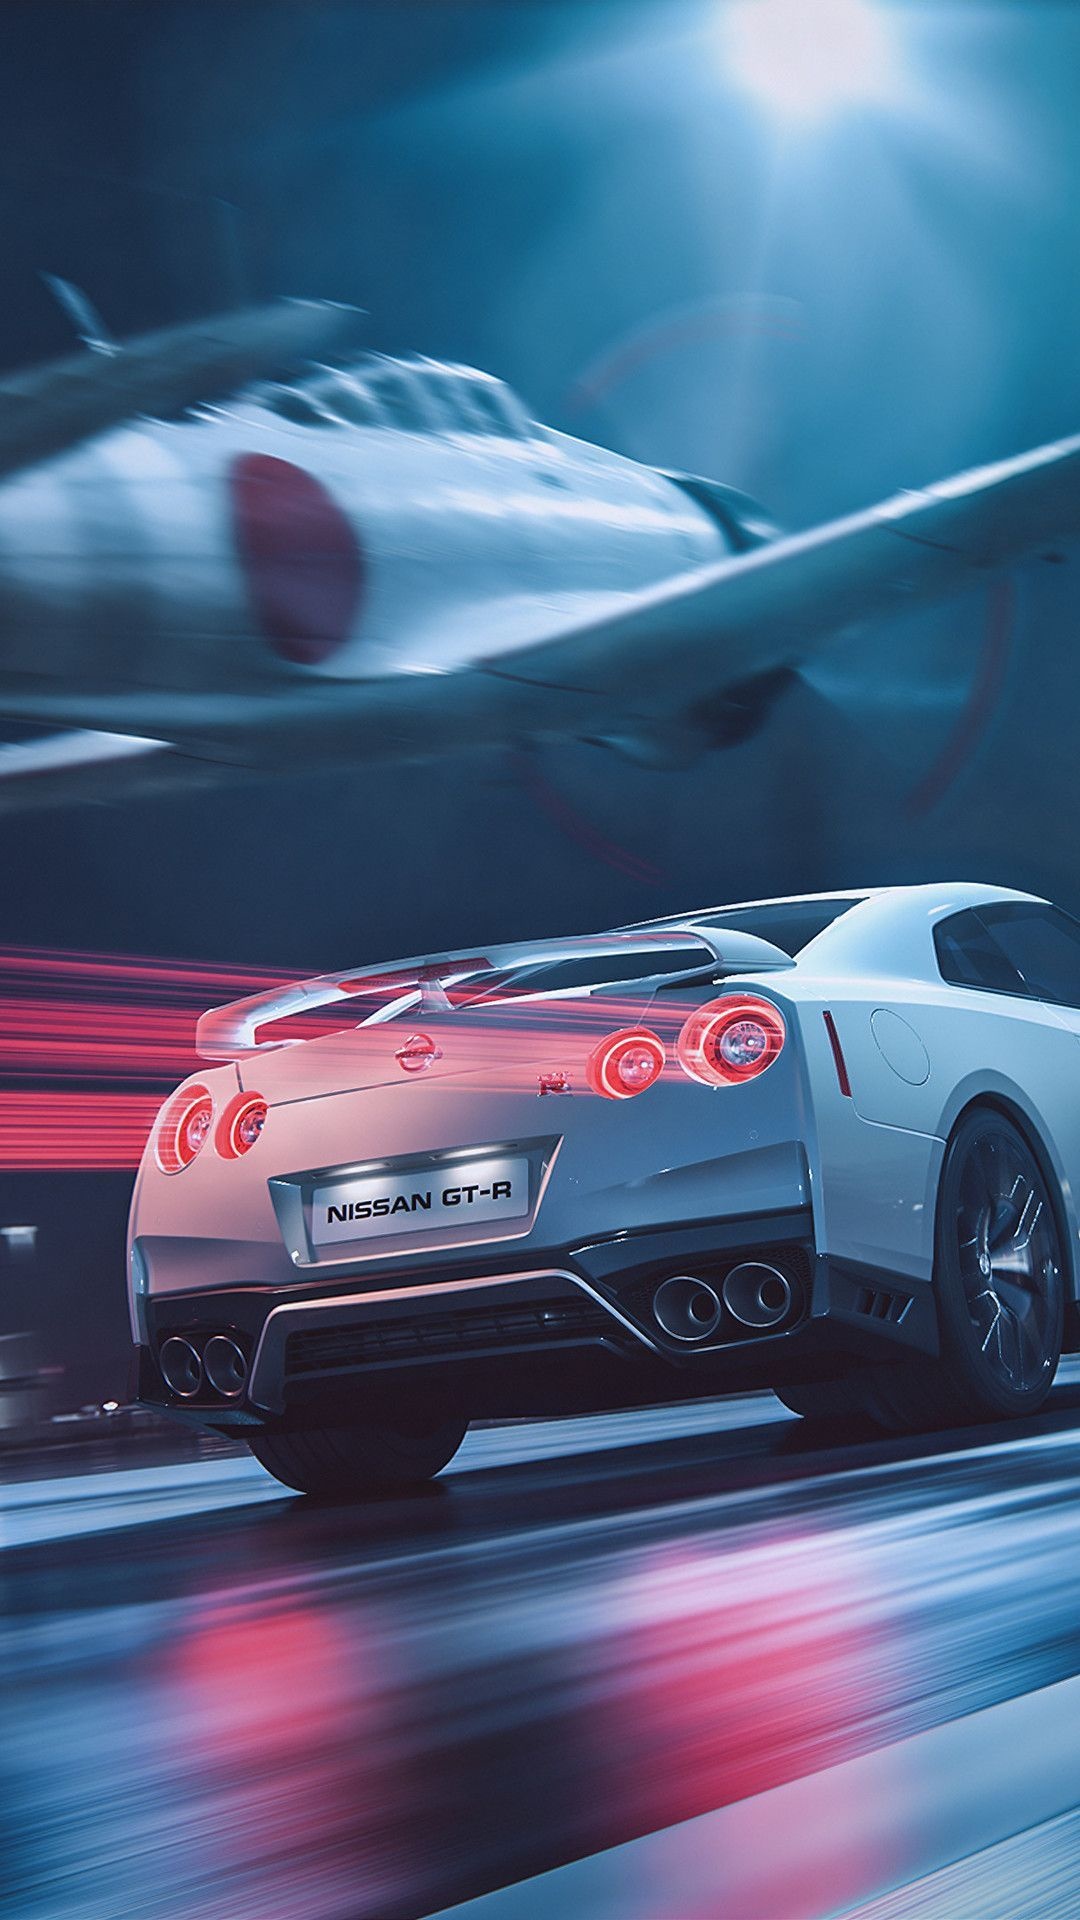 Nissan GT-R, Automotive power, Mobile style, Ultimate performance, 1080x1920 Full HD Handy